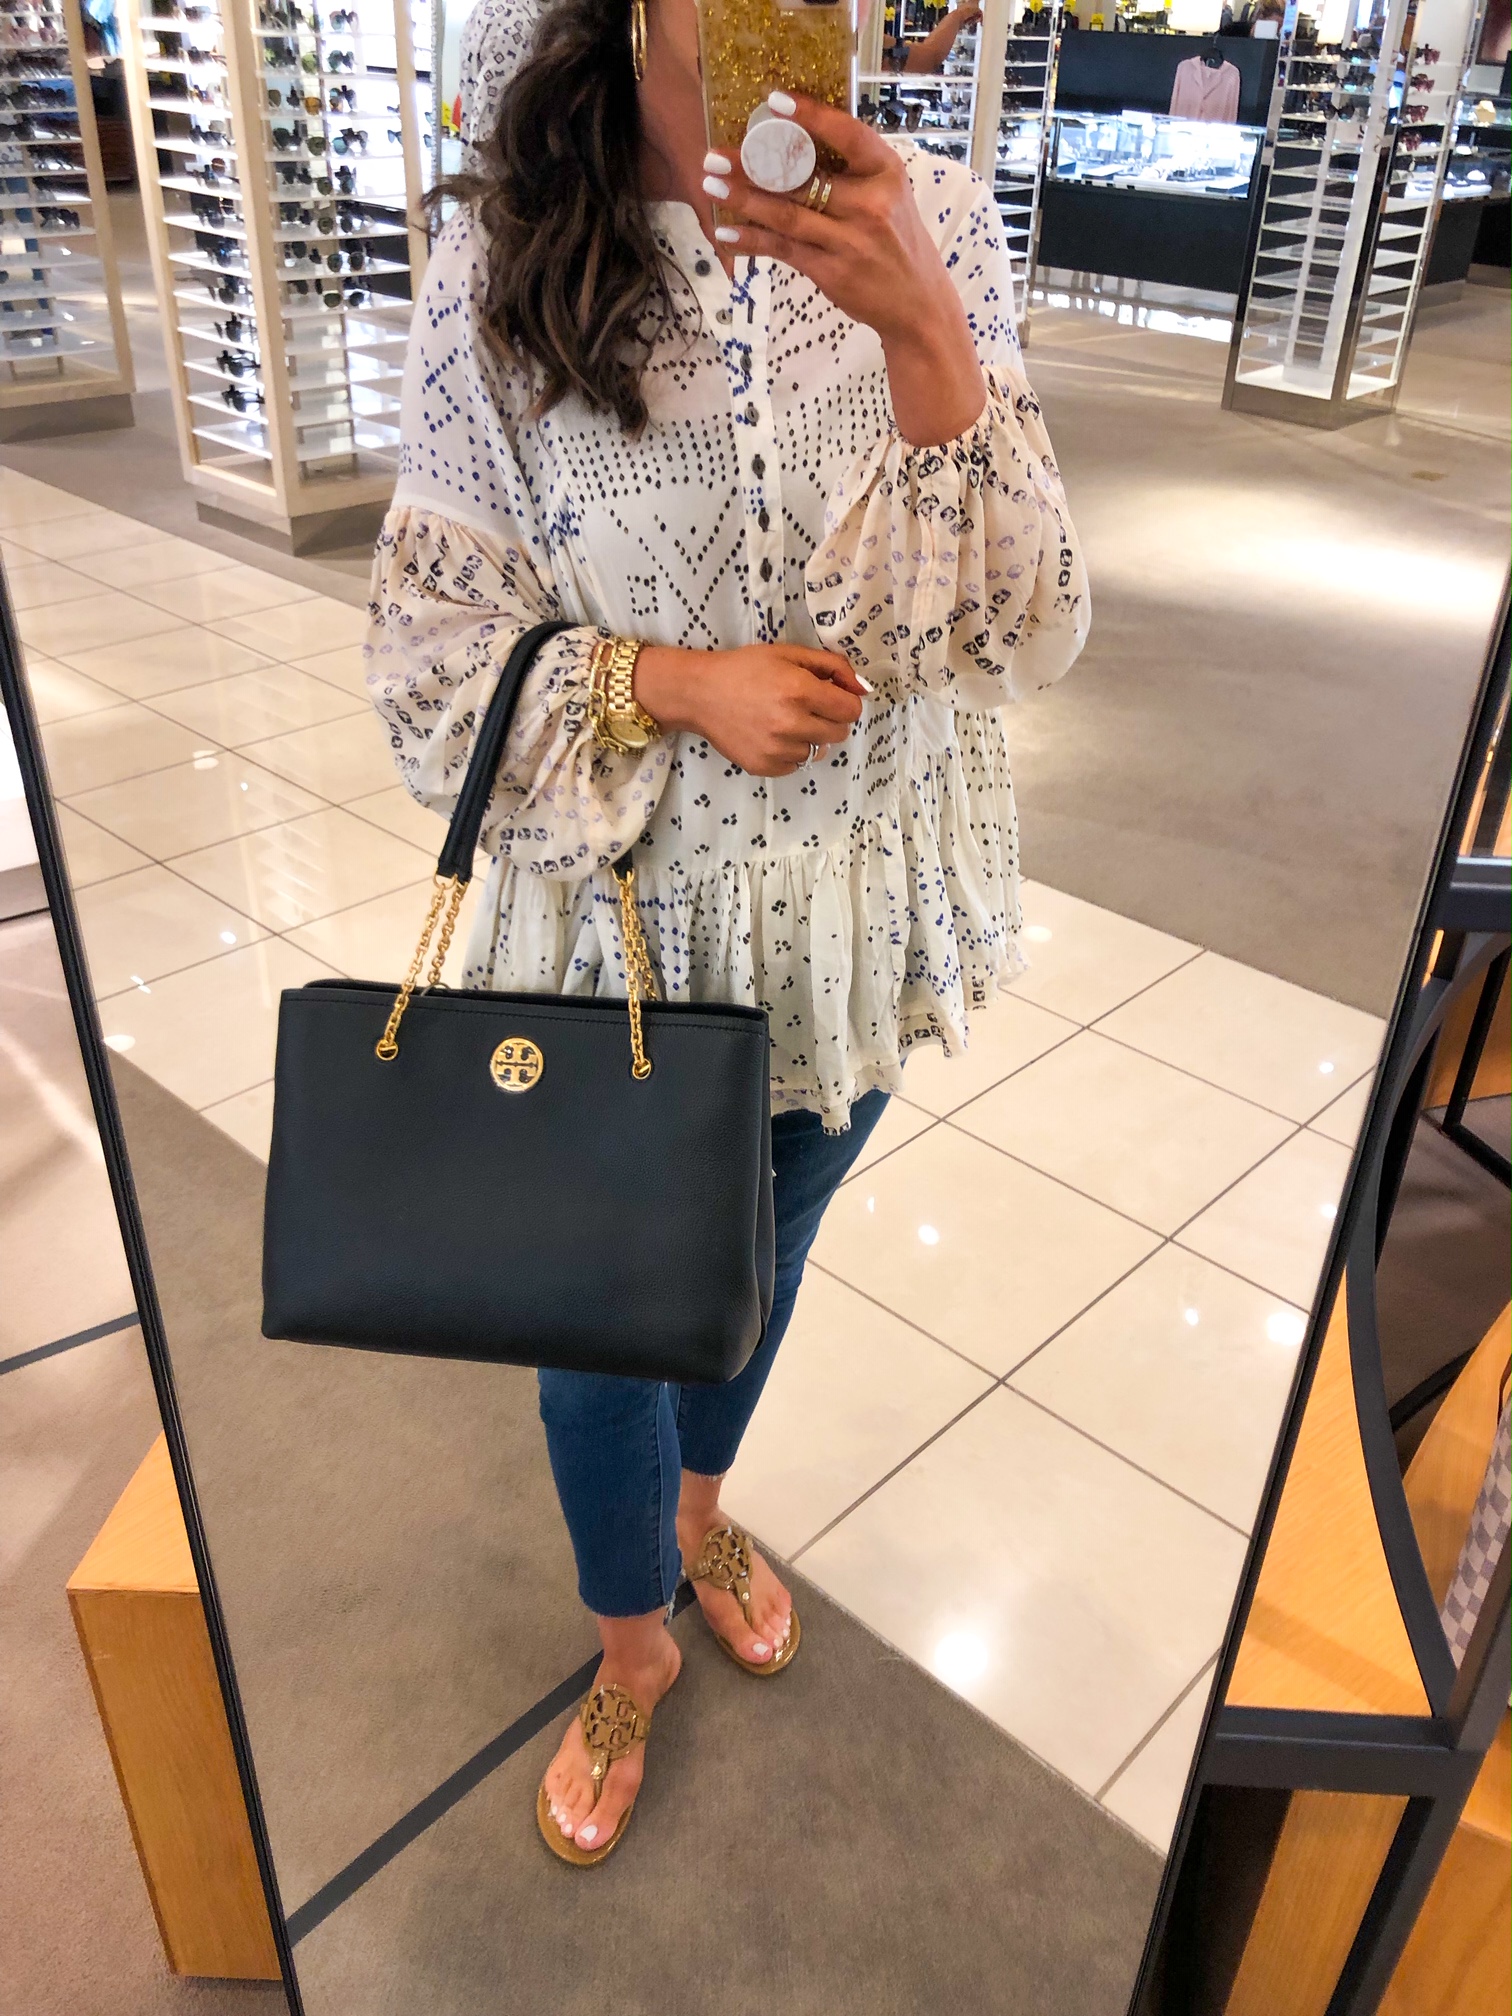 New Tory Burch Markdowns | Up To 60% Off! - The Double Take Girls